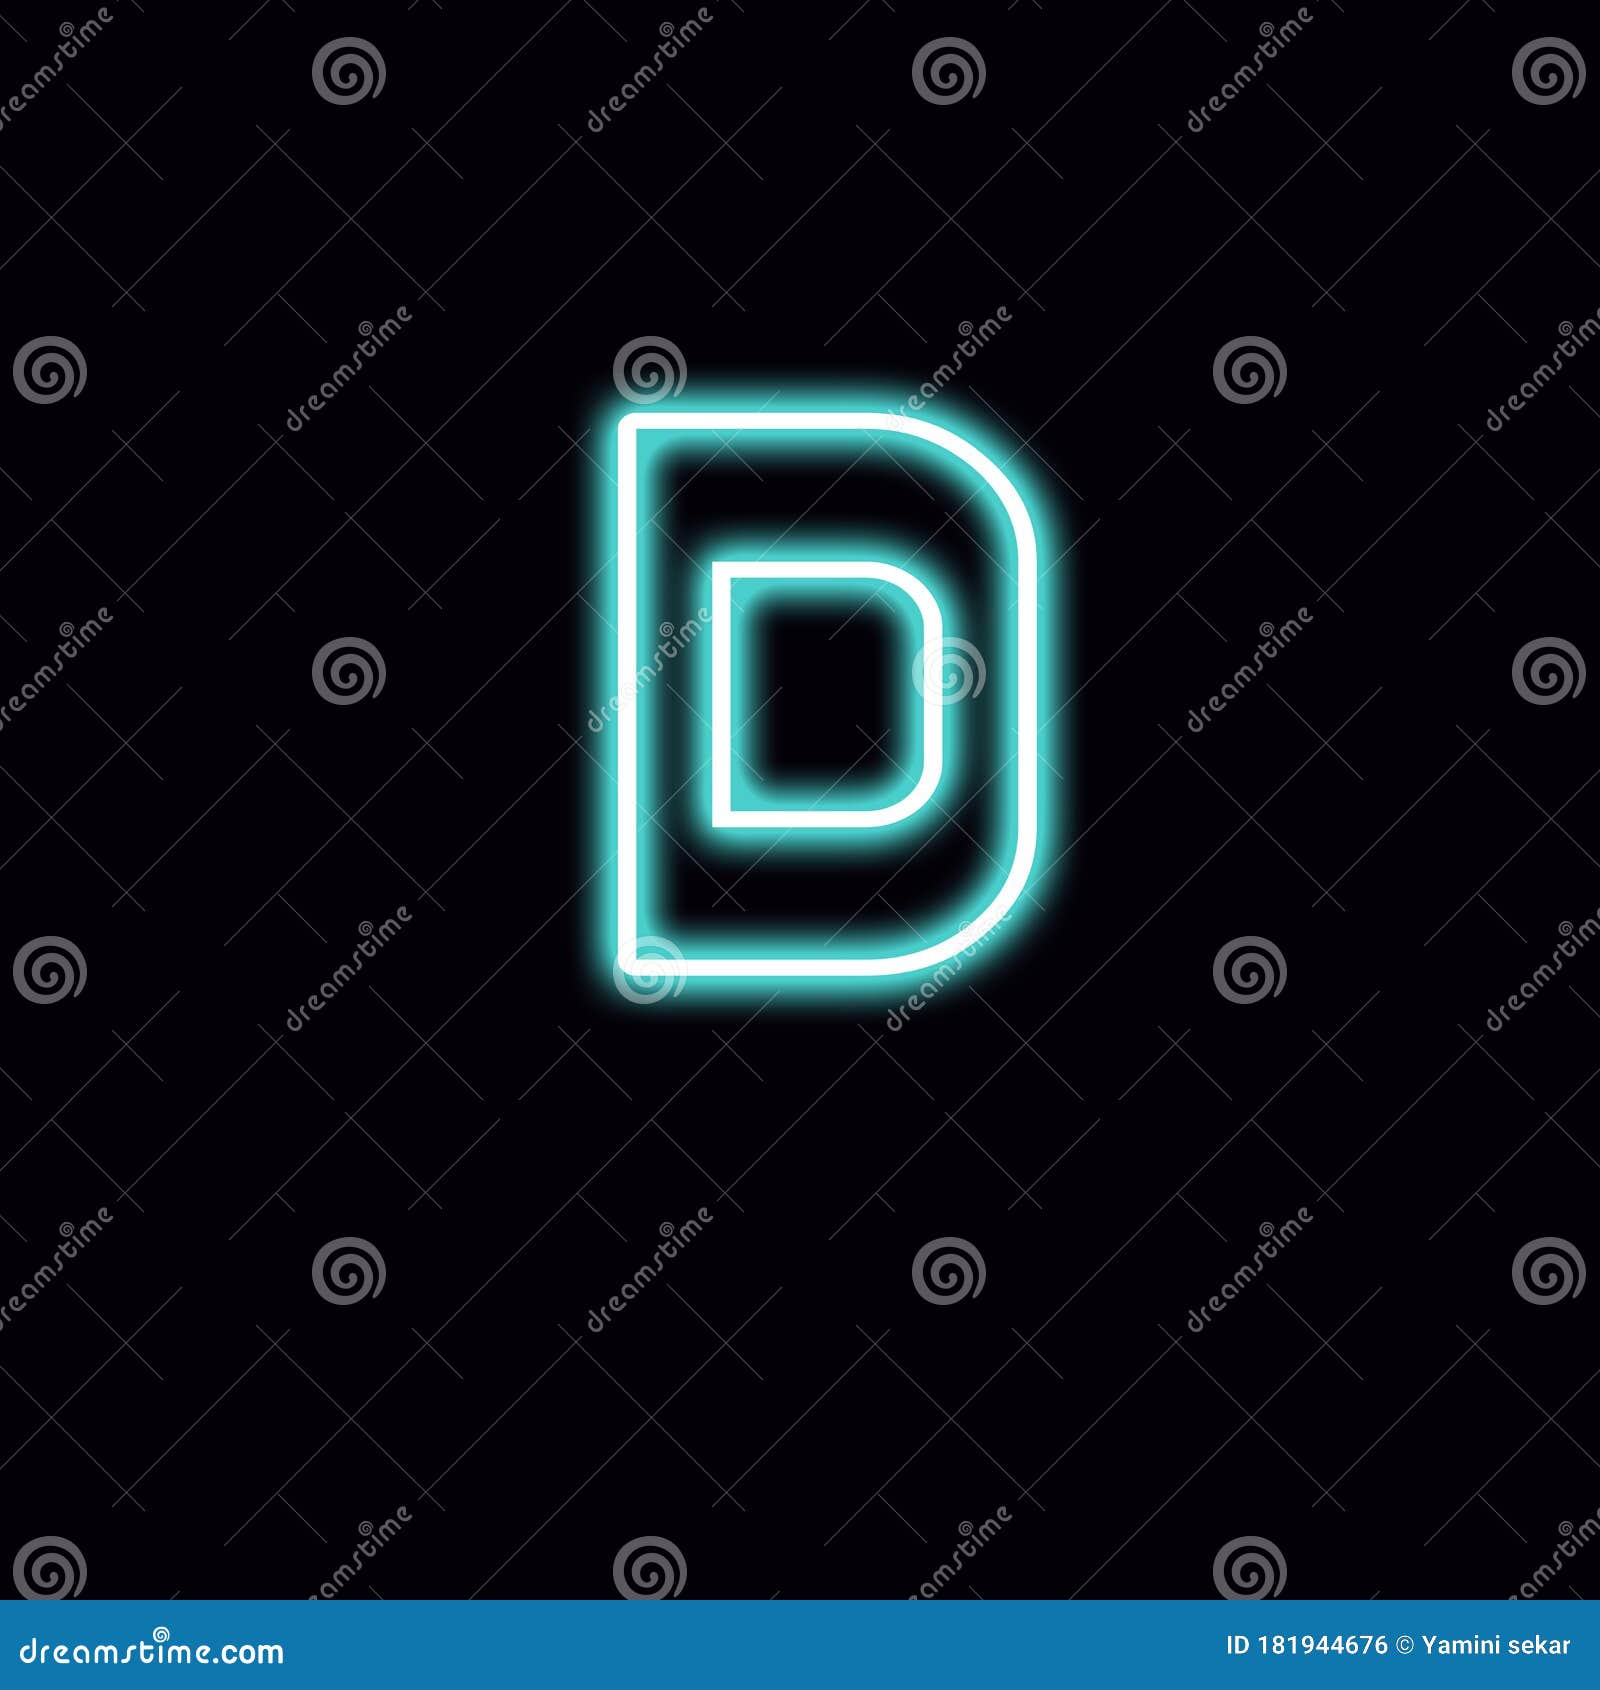 Initial D Logo Design, Initial D Logo Design with Neon Style, Logo for ...